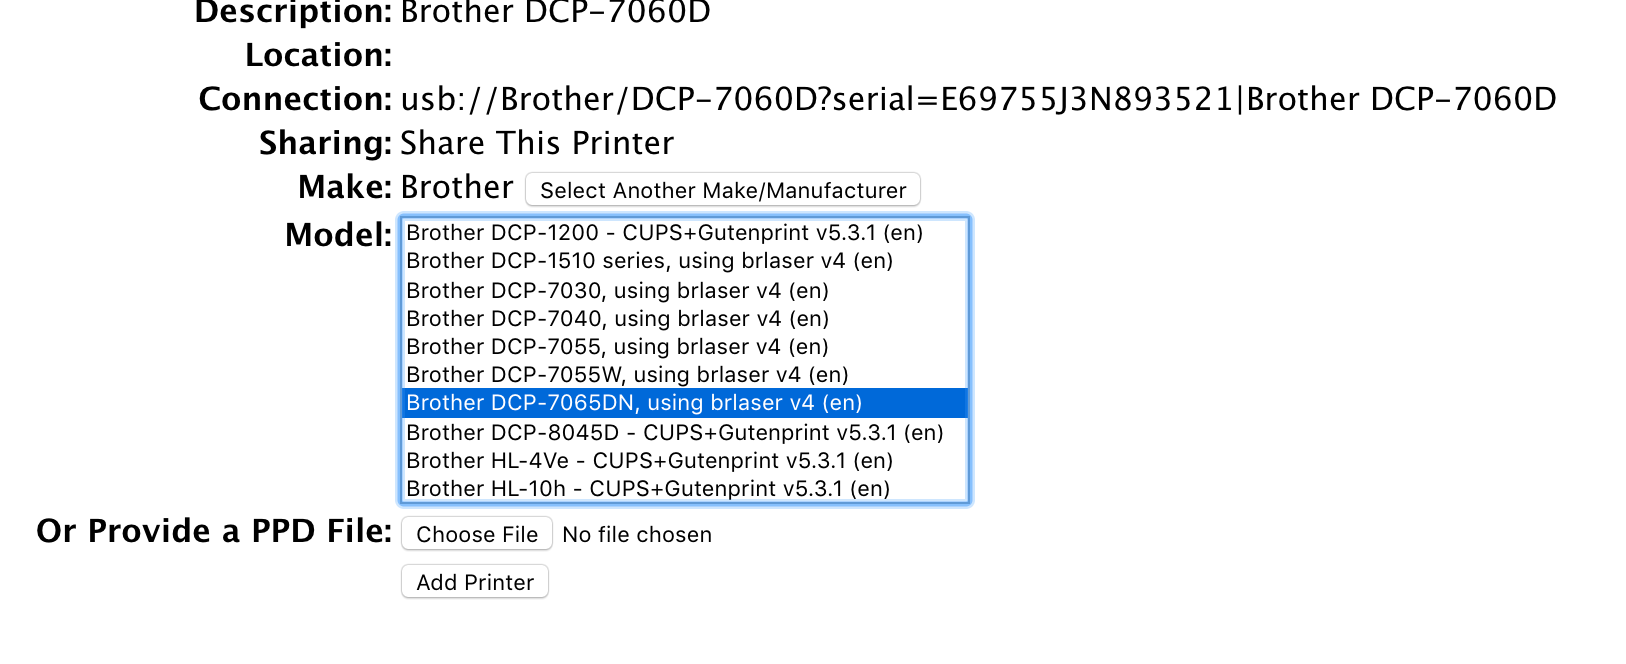 How To Use Your Brother Printer With Cups On Raspberry Pi By Alexander Belov Medium